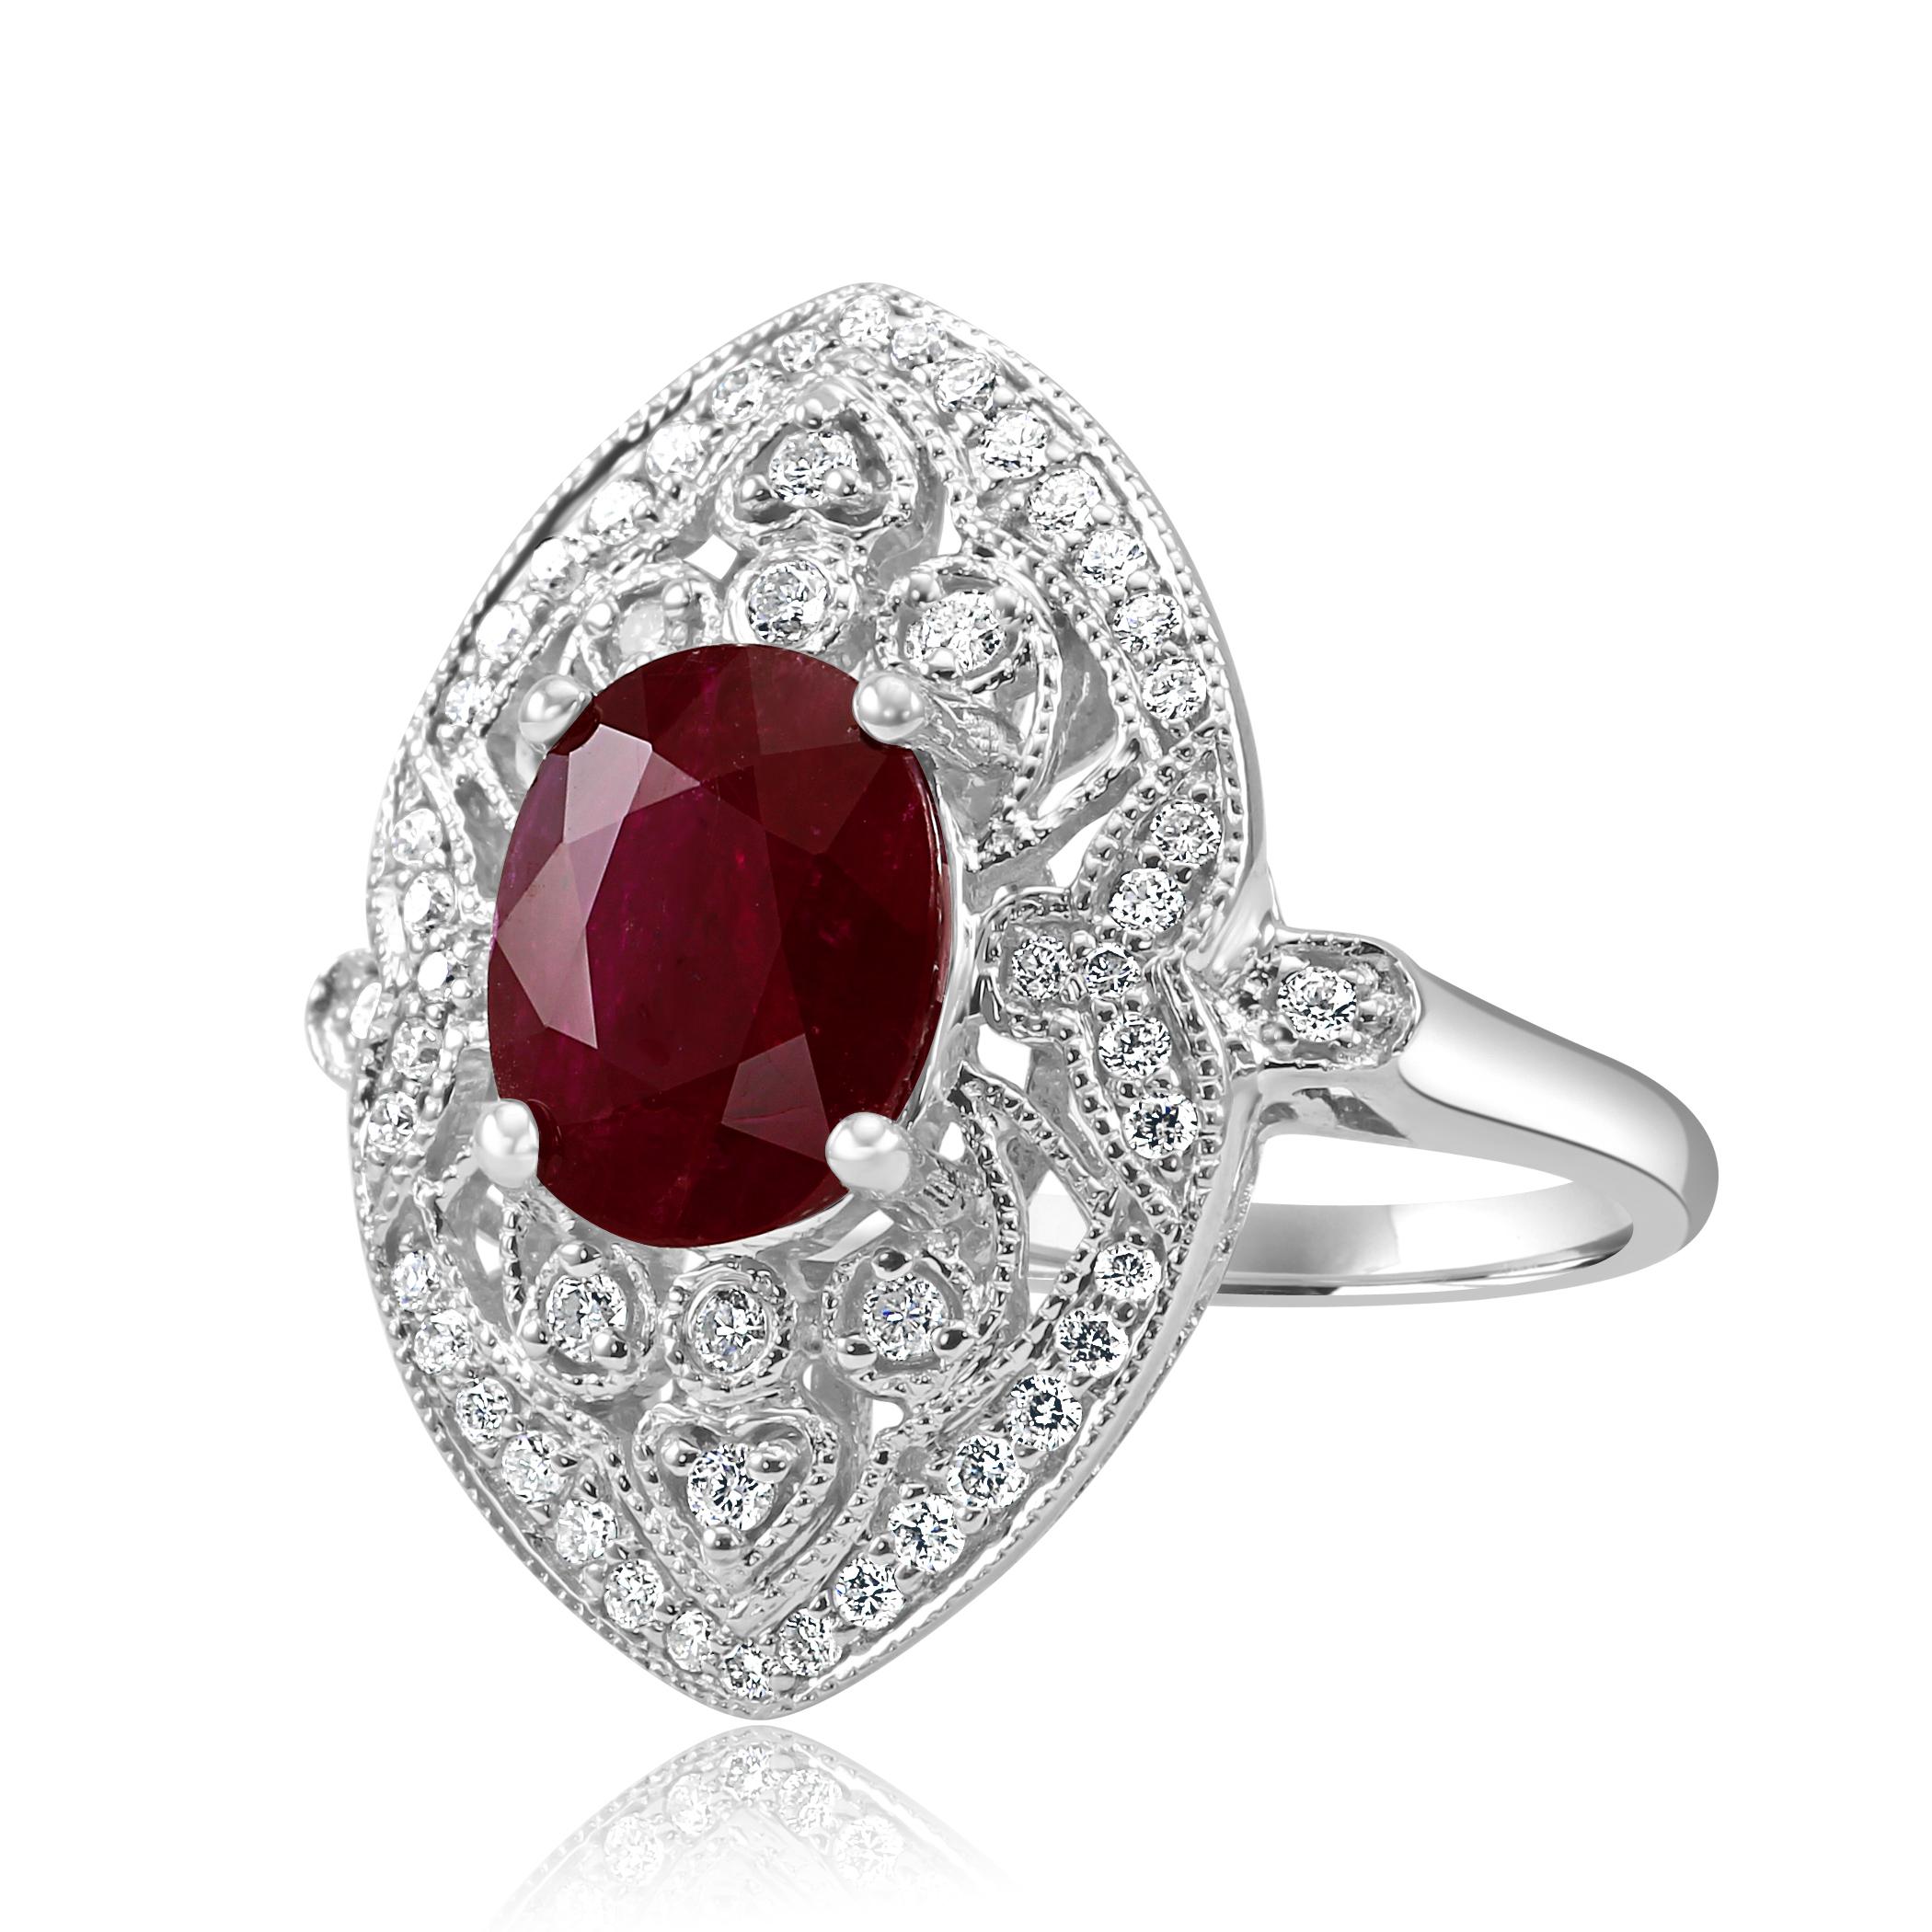 Oval Cut 3.17 Carat Ruby Oval Diamond Halo Art Deco Style White Gold Cocktail Ring